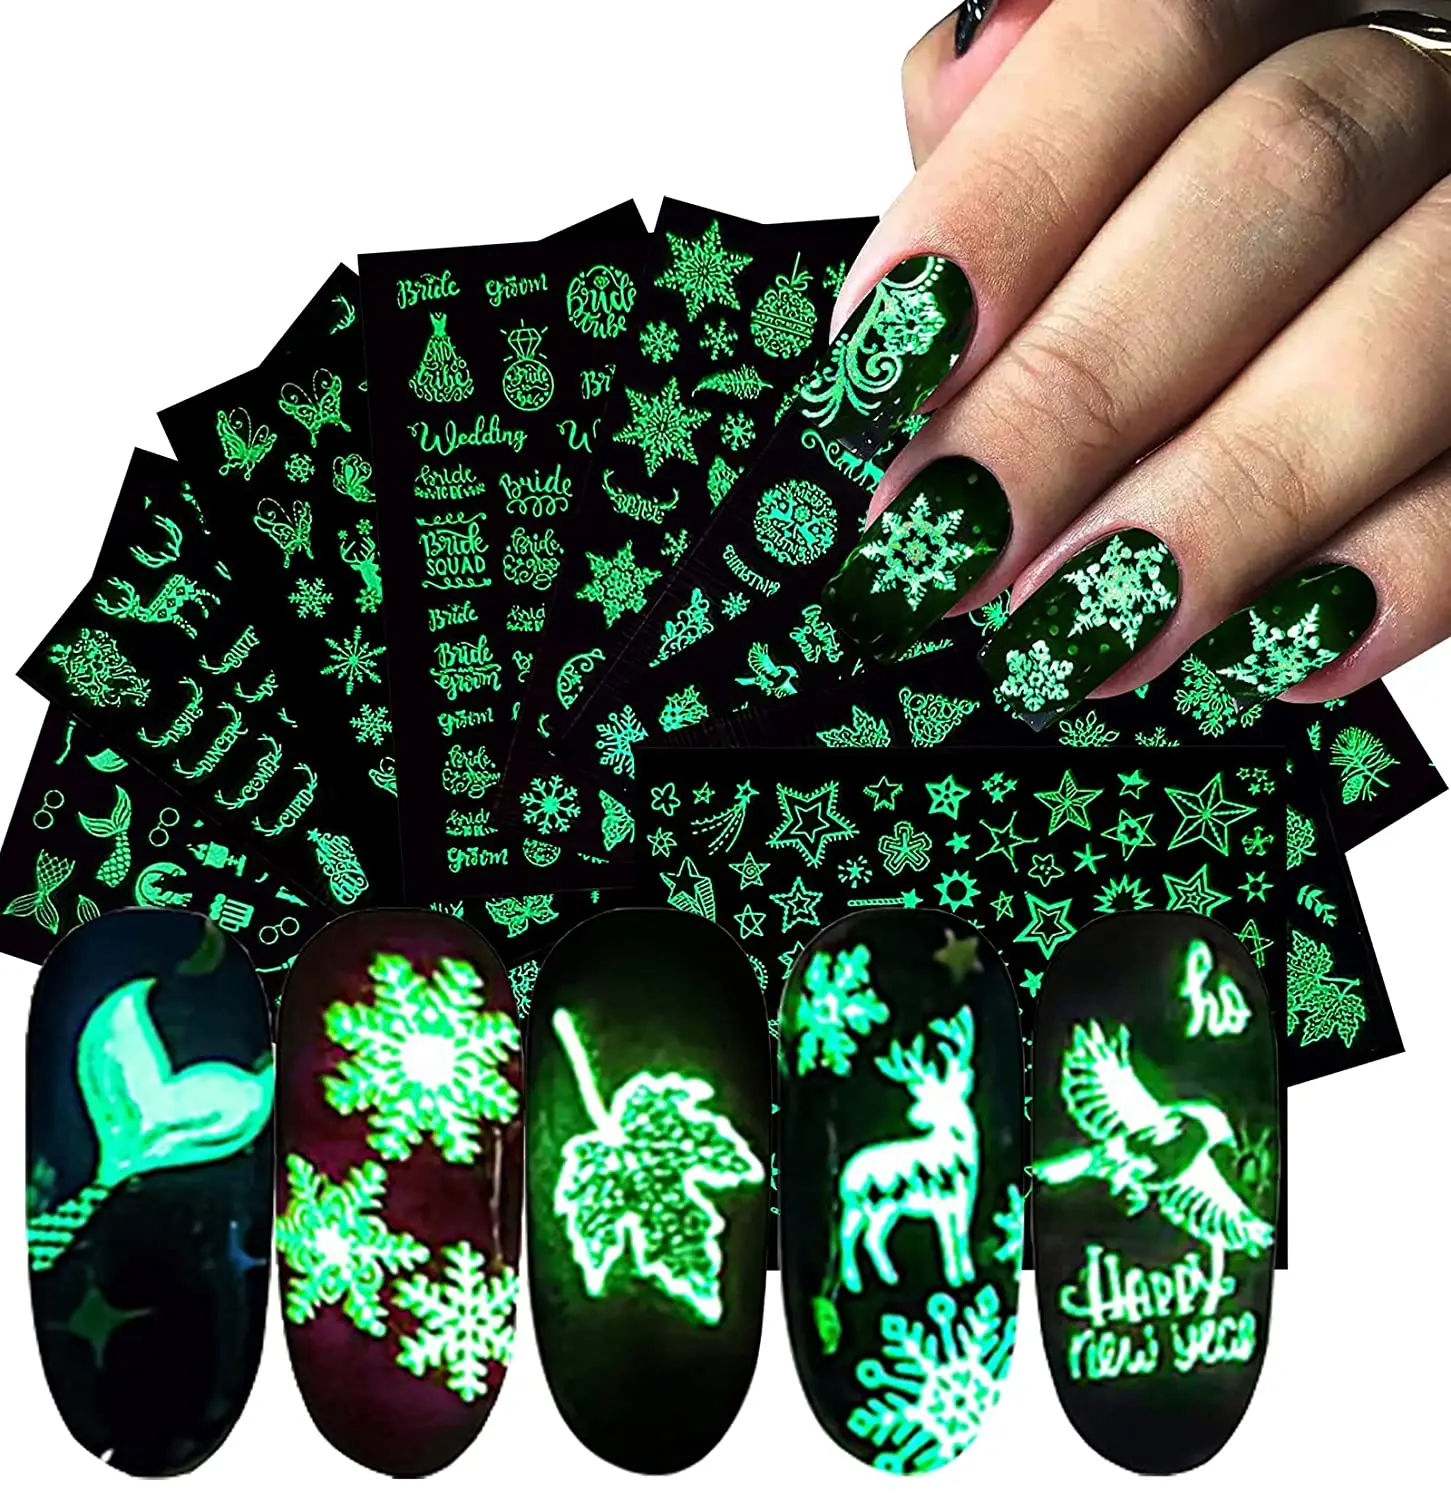 

16 Sheets Luminous Nail Art Stickers Christmas Decals Nail Foils Fluorescent Glow in The Dark Xmas Party Design Manicure Sliders